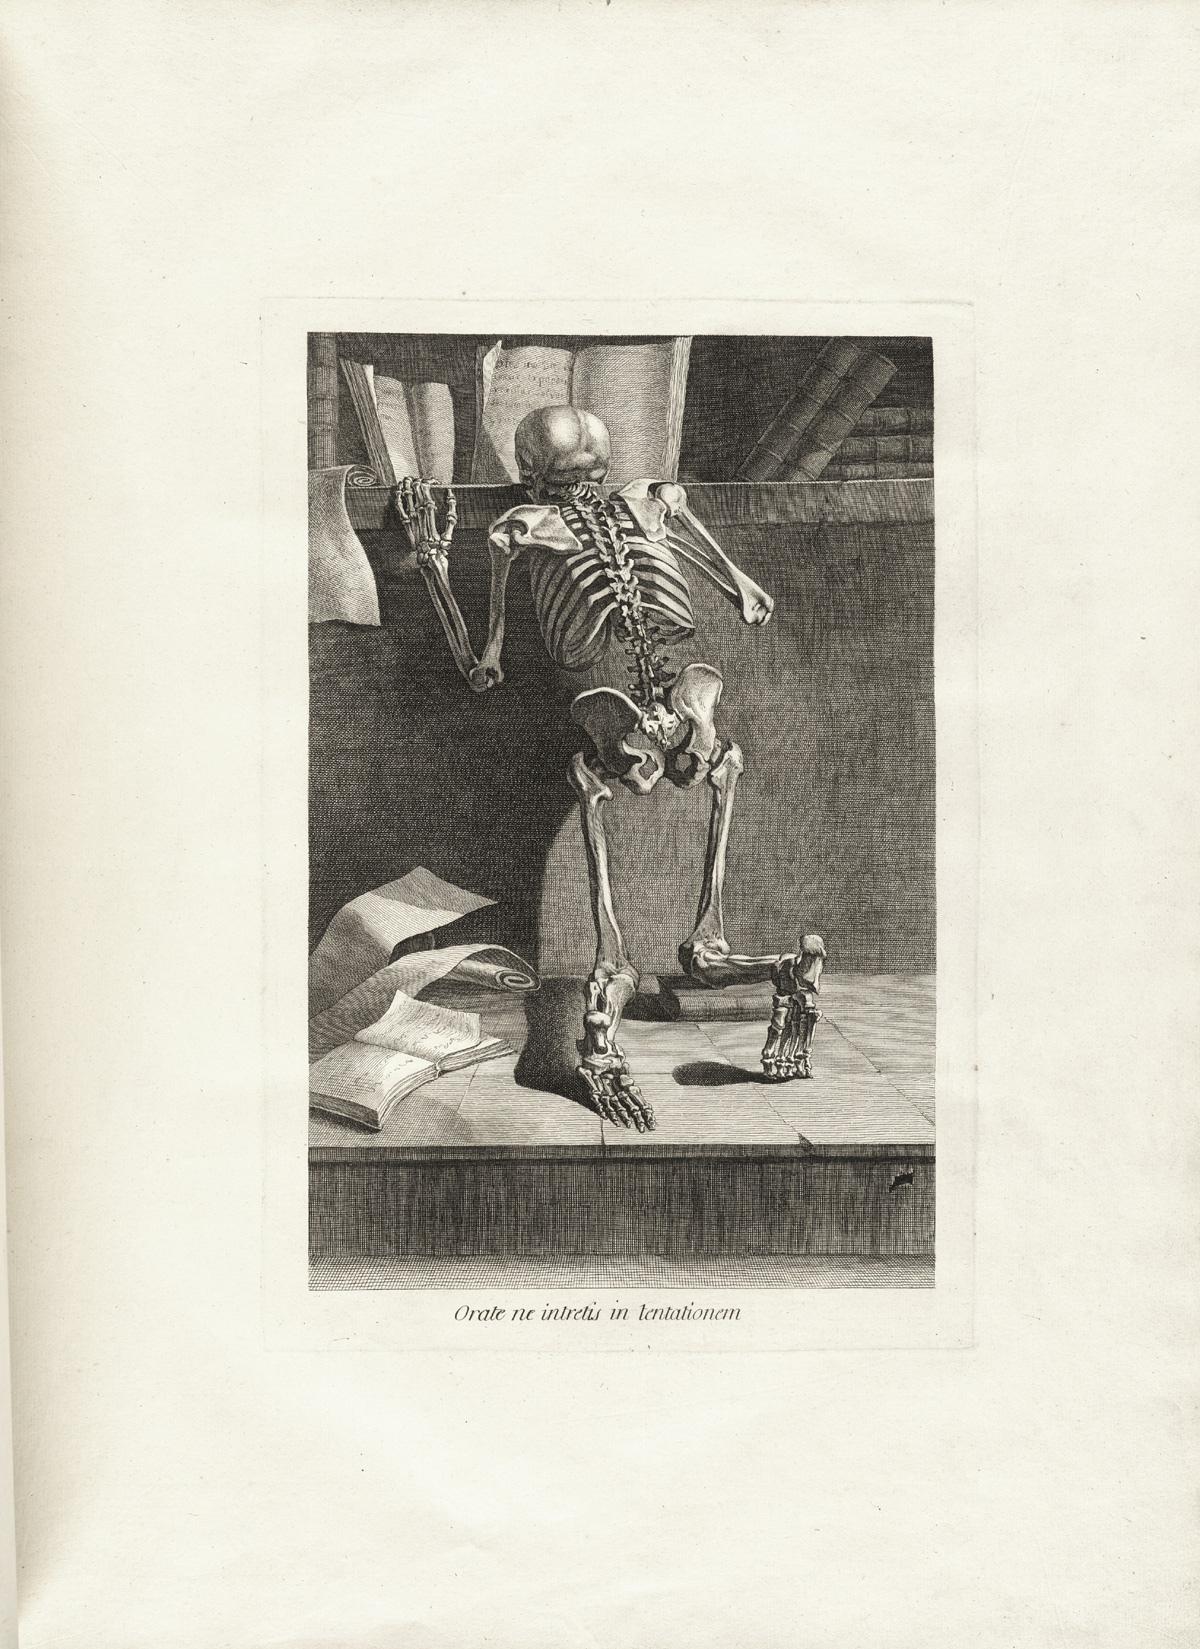 Engraving of a skeleton with his back to the viewer kneeling forward reading a book, from Jacques Gamelin’s Nouveau recueil d’osteologie et de myologie, NLM Call no.: WZ 260 G178m 1779.